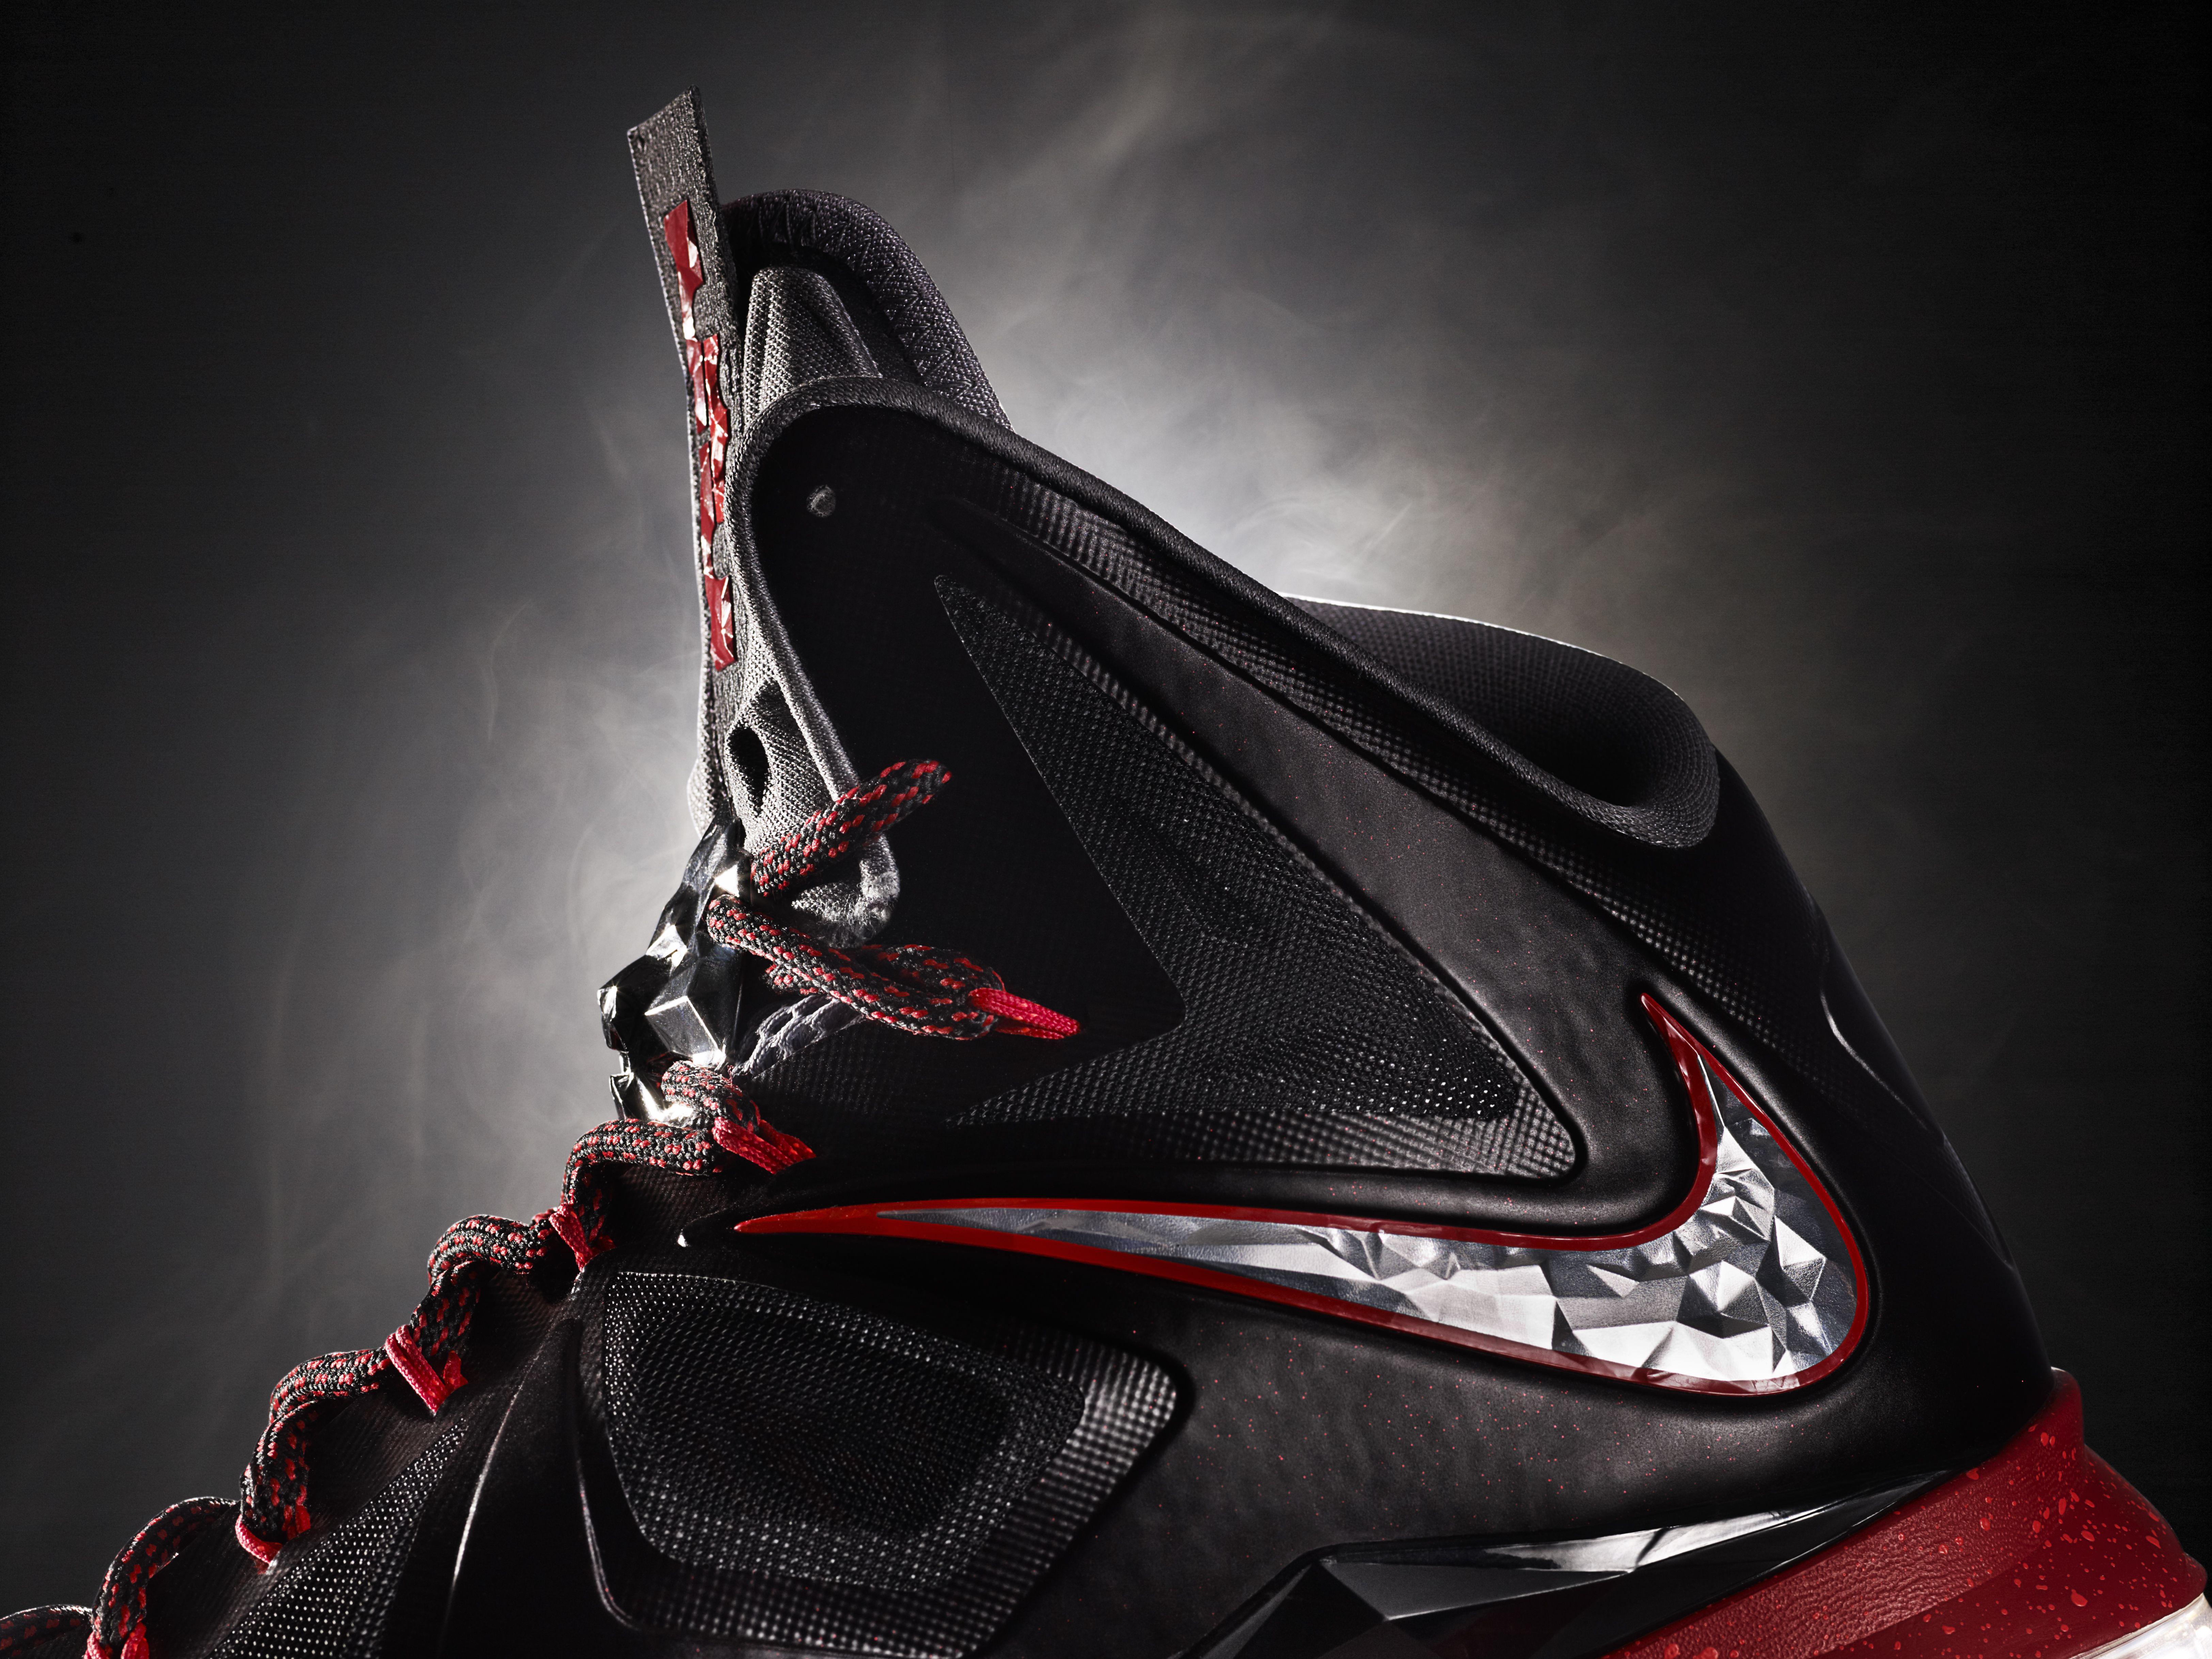 Introducing the LEBRON X